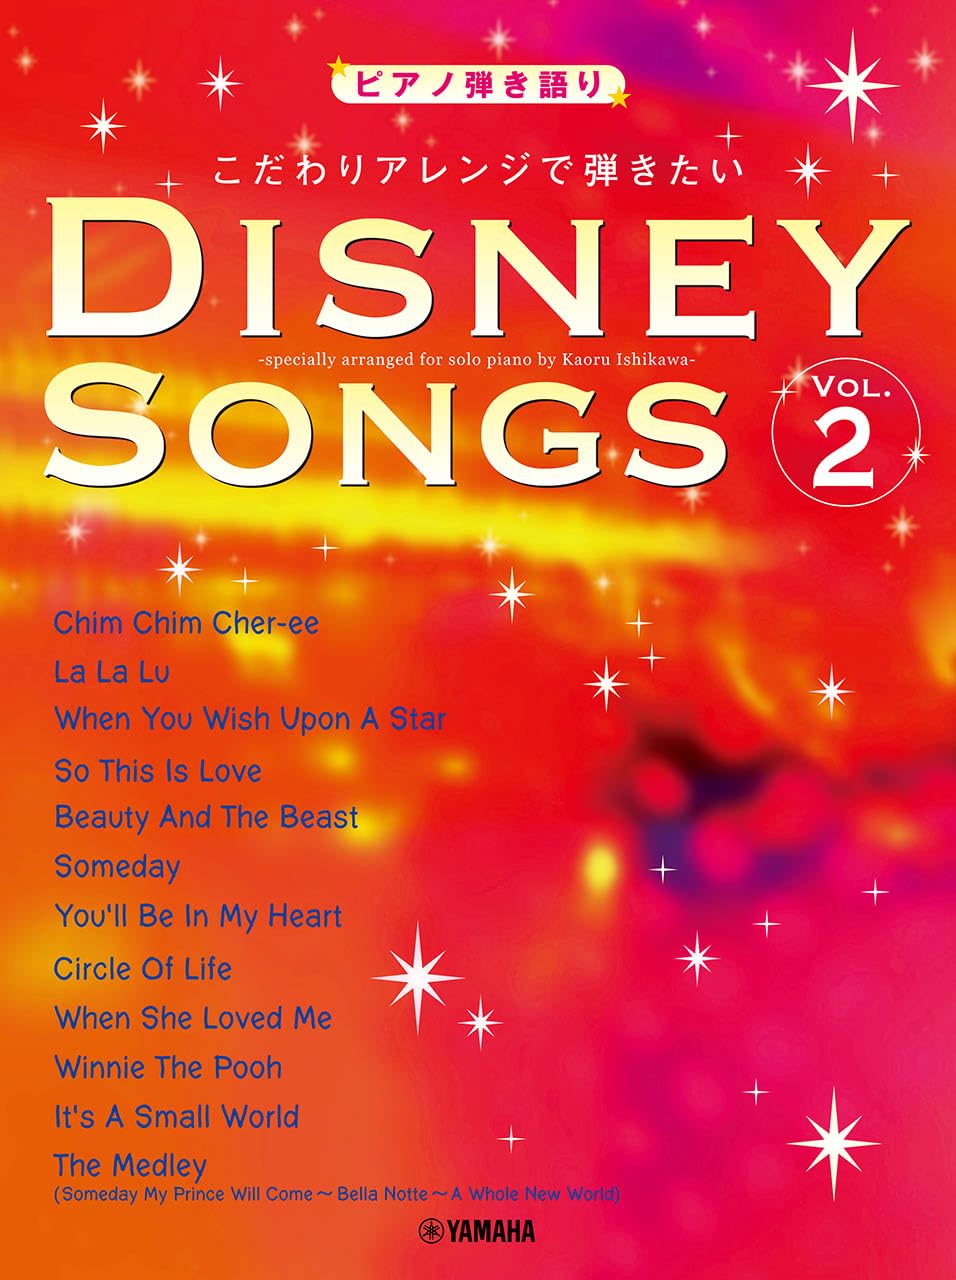 Disney Songs Vol.2 Specially Arranged for Piano and Vocal(Upper-Intermediate)